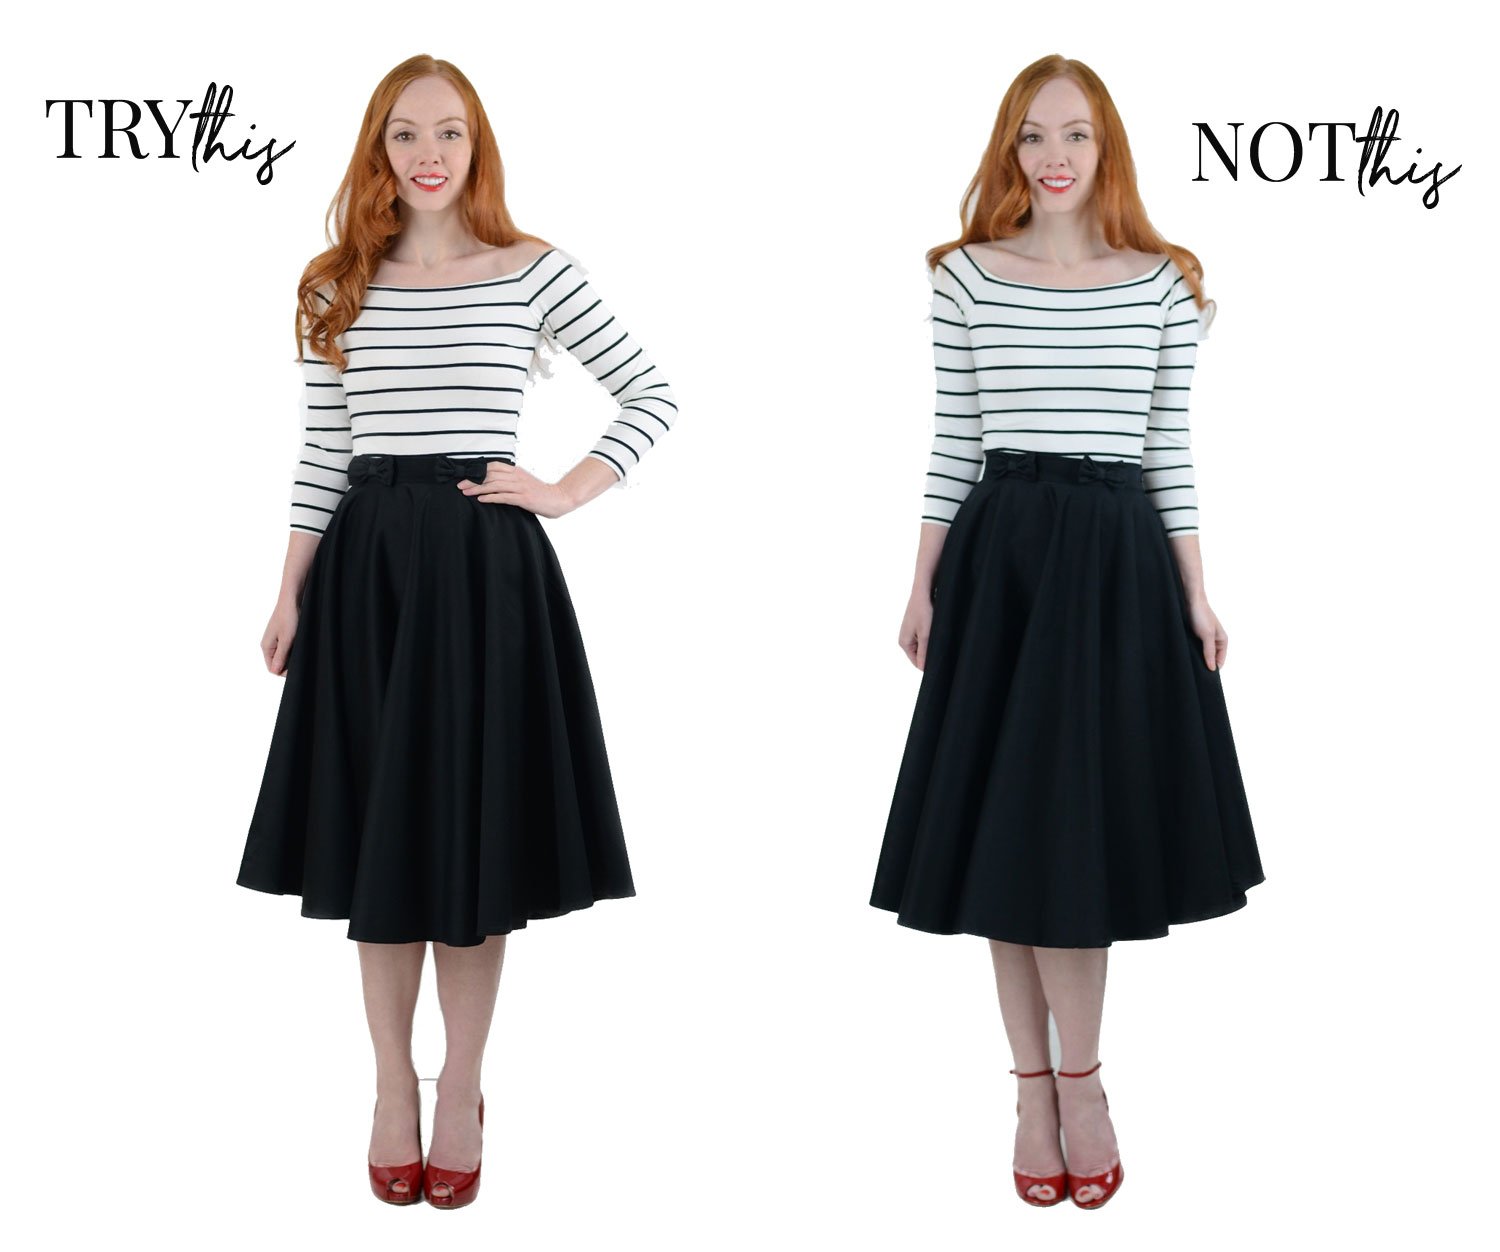 style advice: what kind of shoes should you wear with a midi skirt